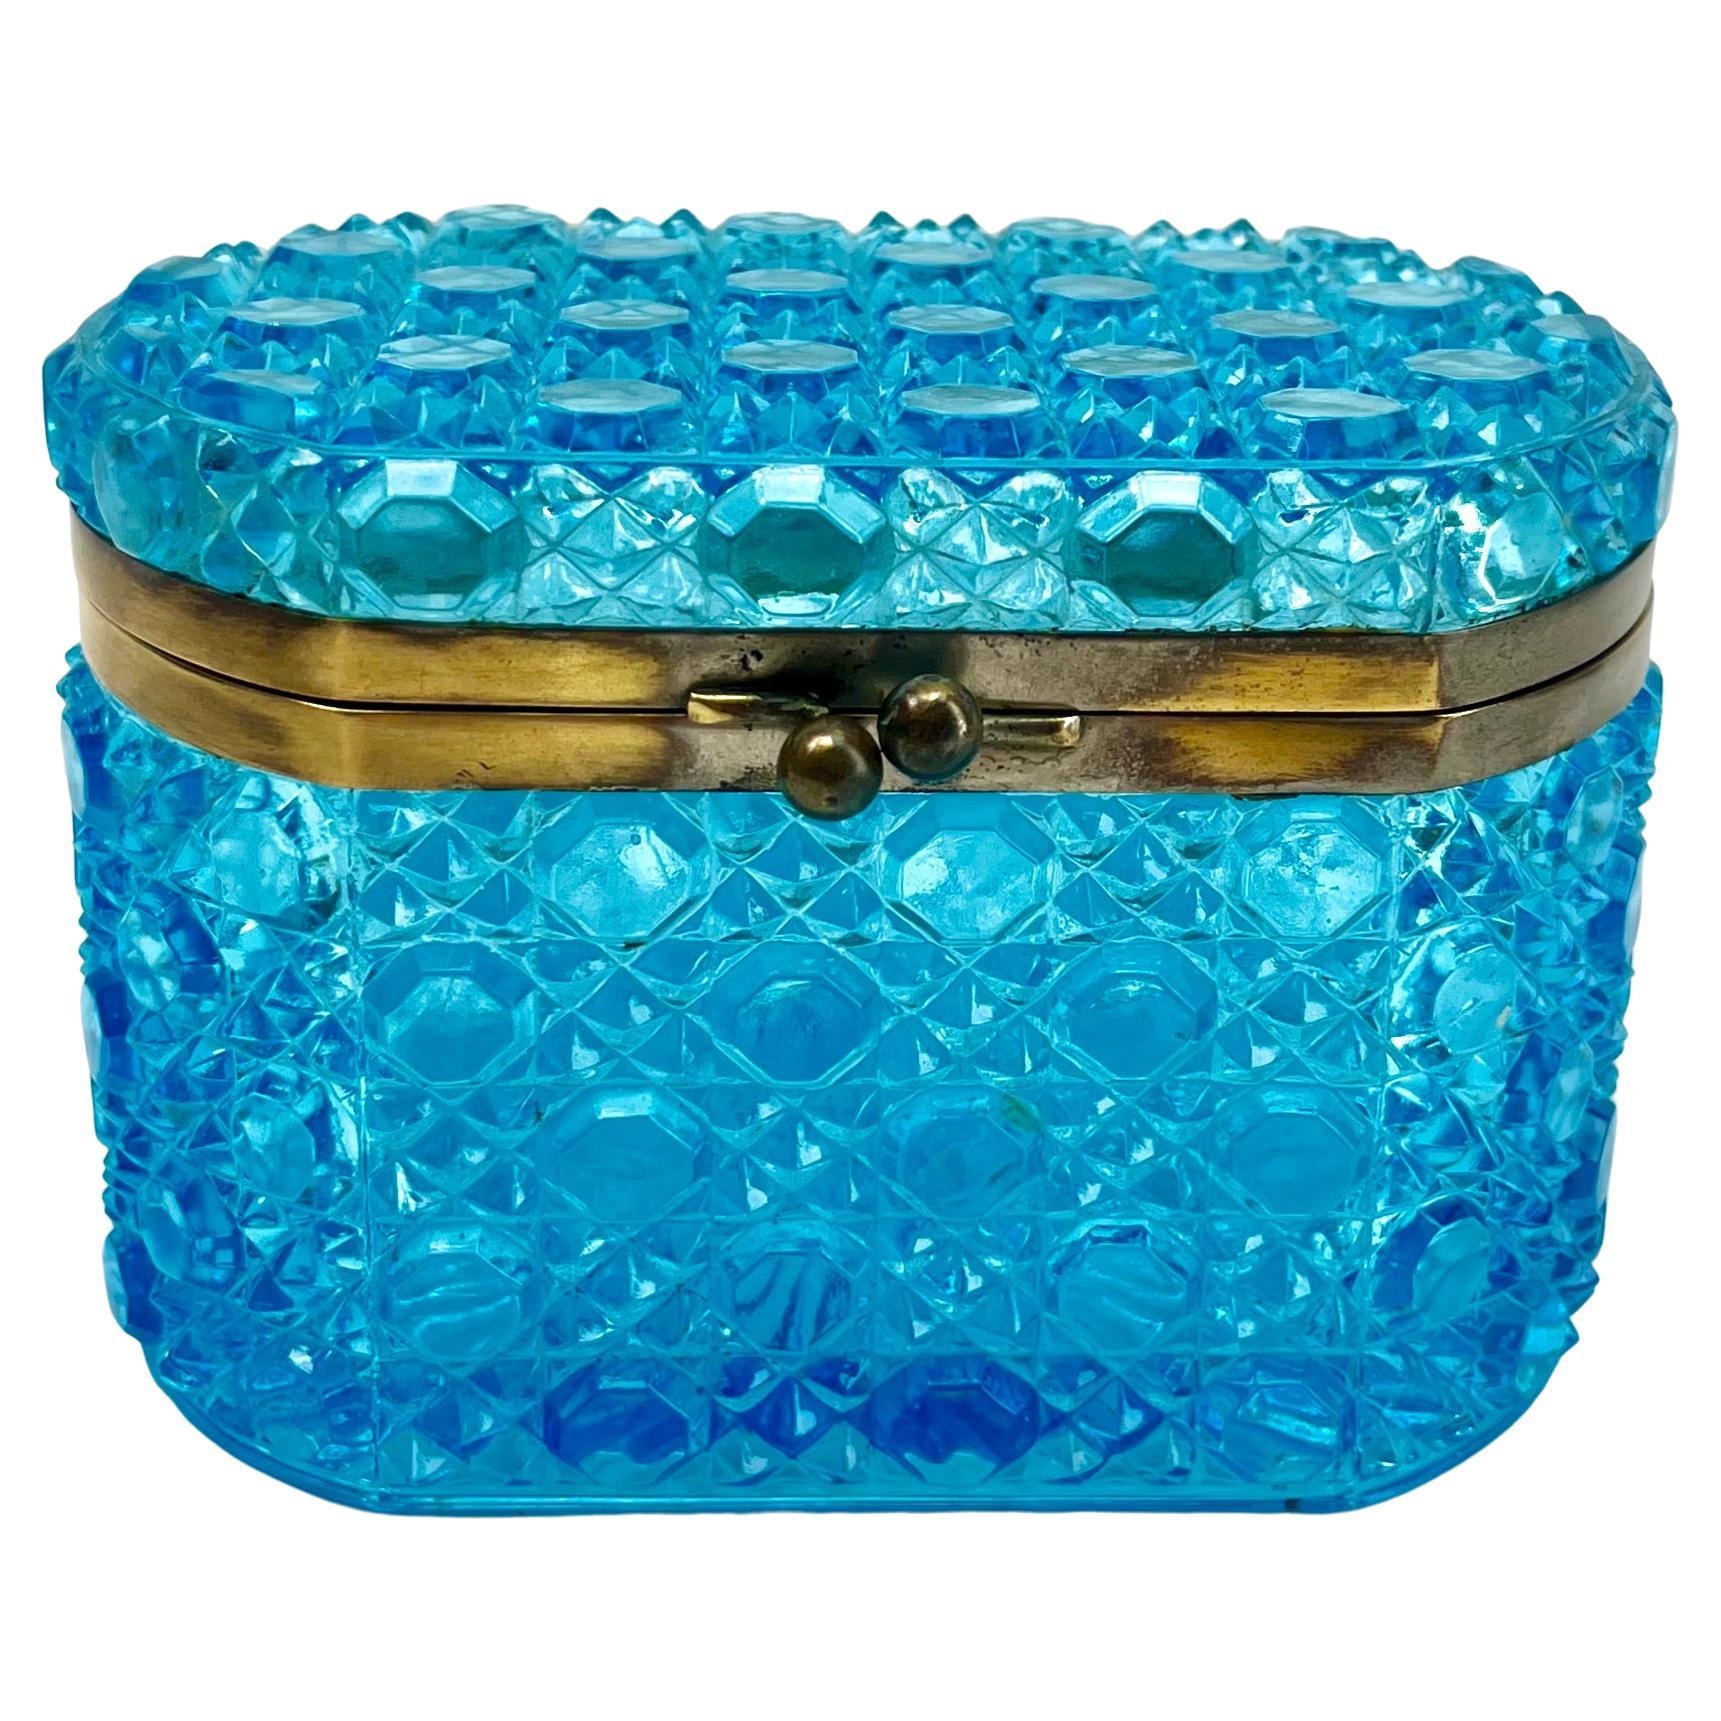  Baccarat French Cut Crystal Jewelry Box with Brass Hardware